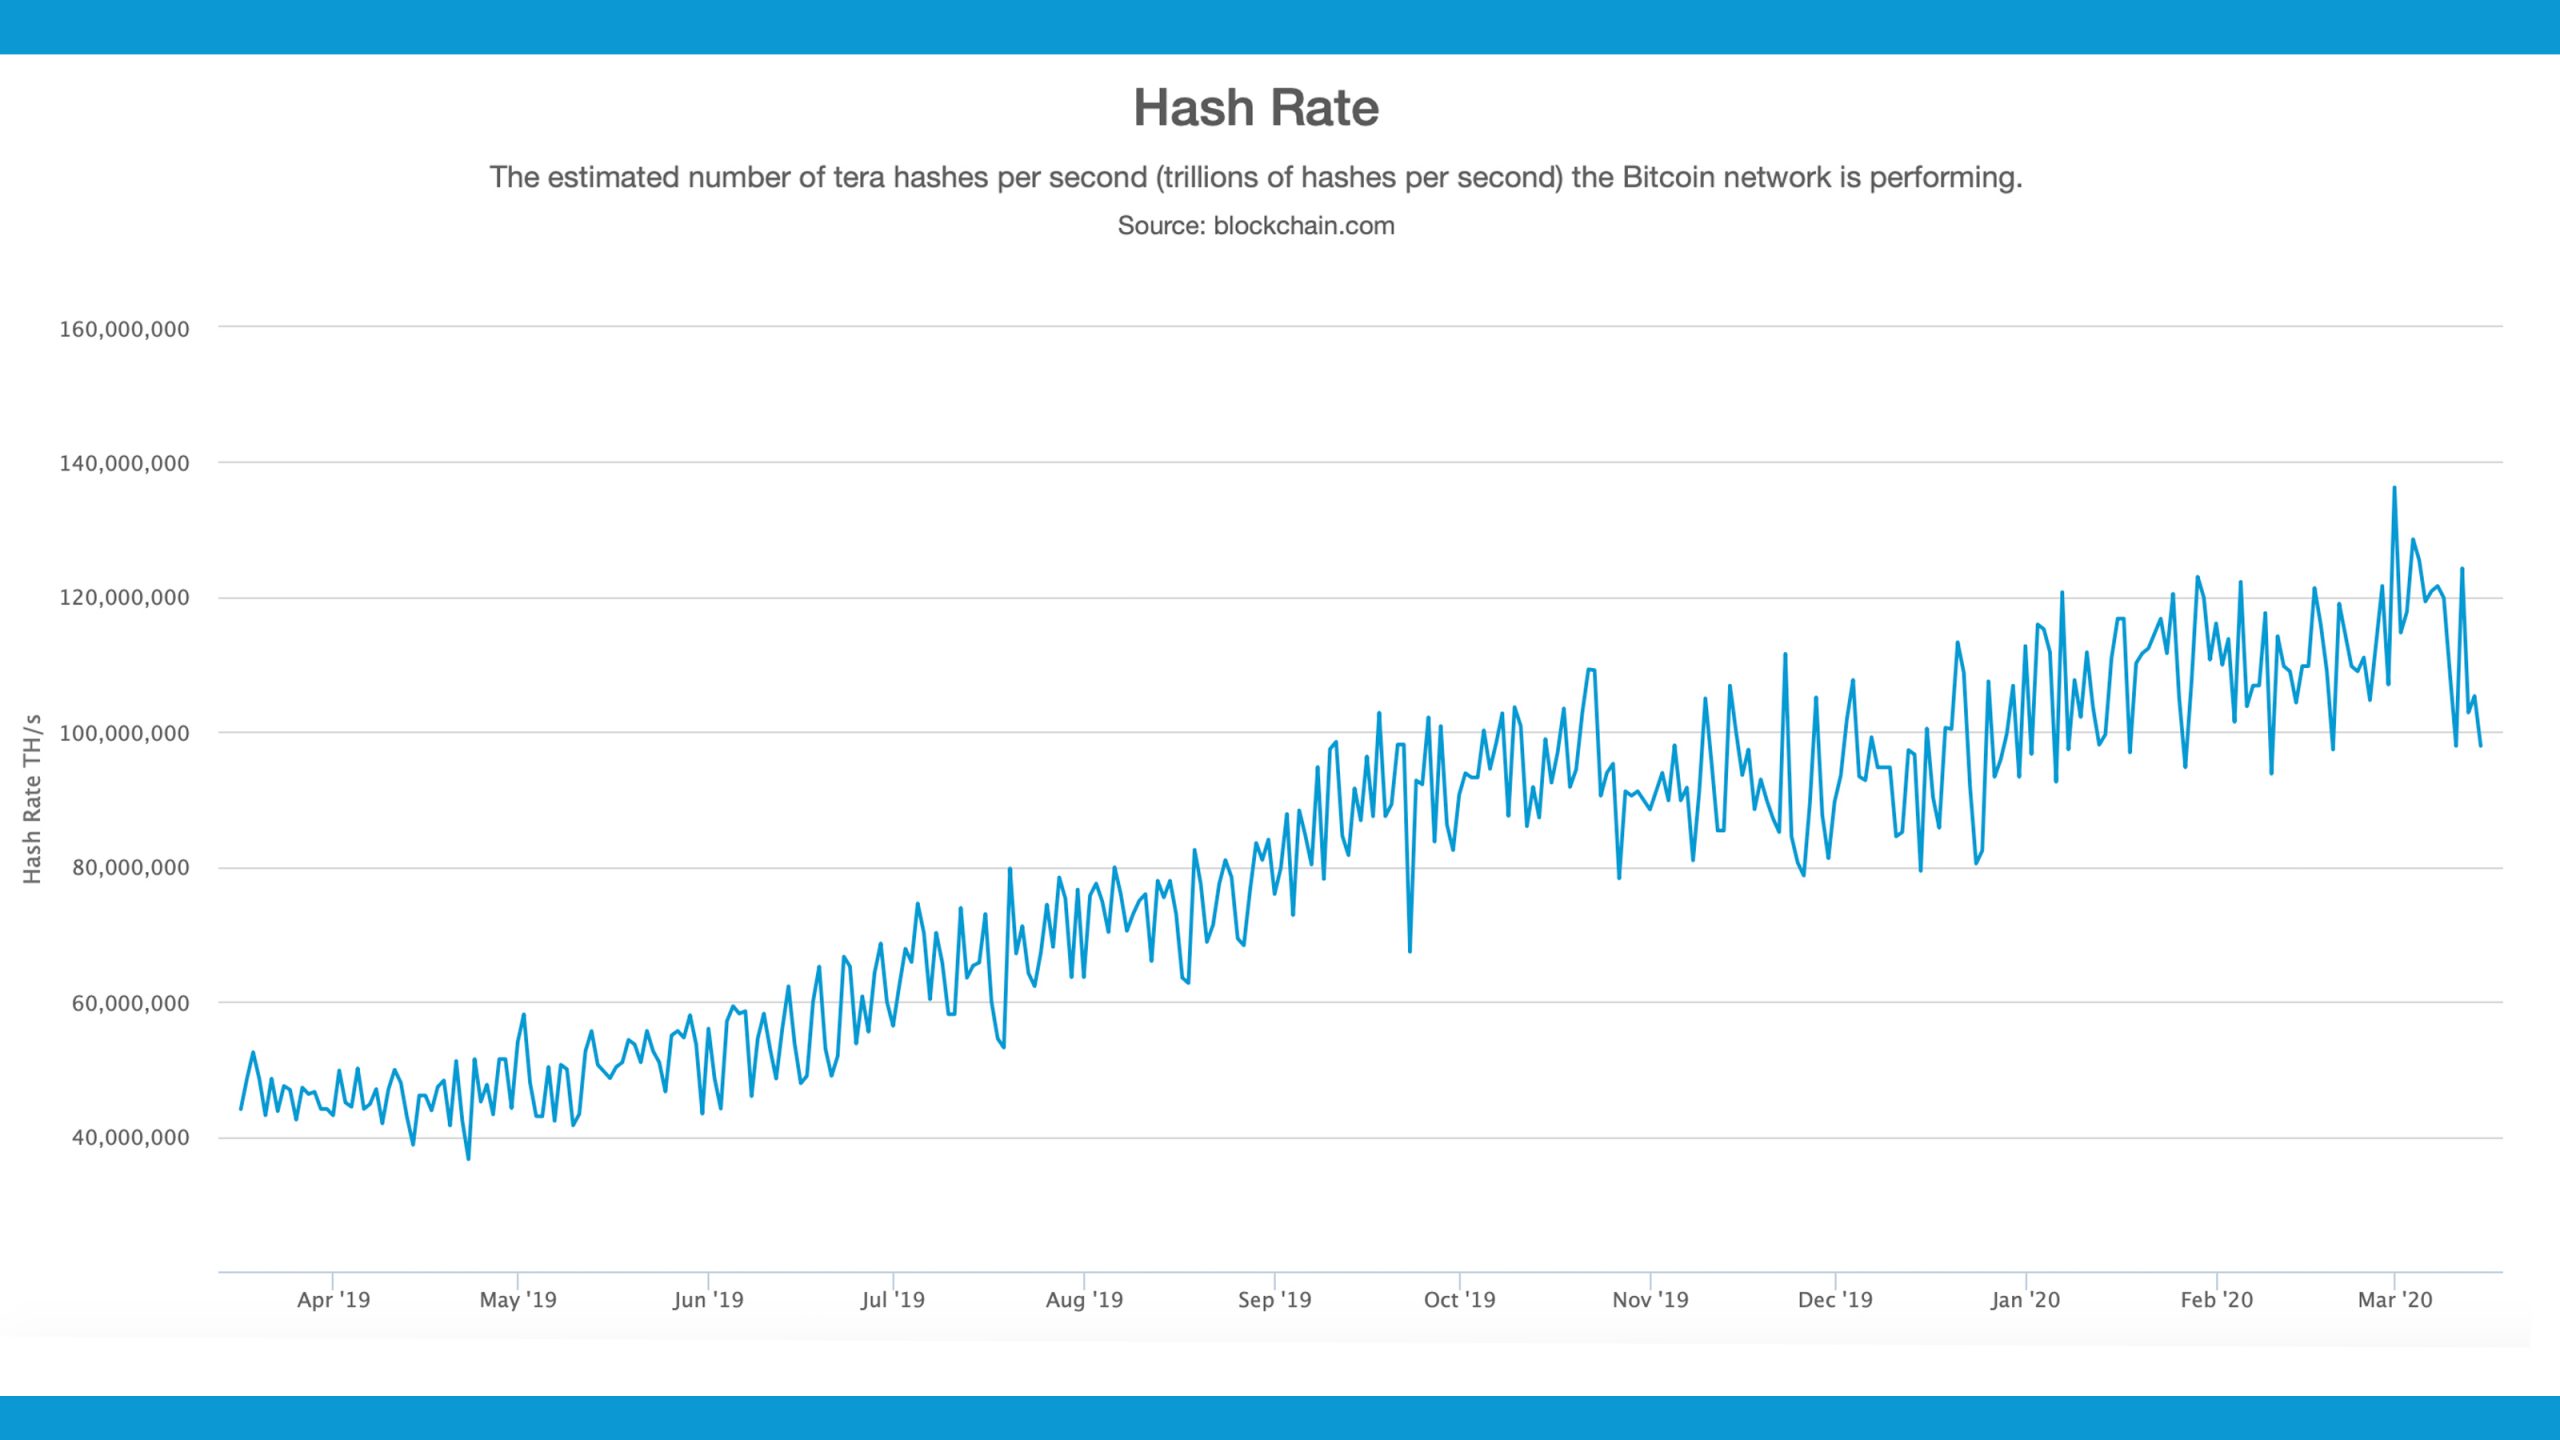 Hashrate Follows Price Drop - 20% Lower Before the Bitcoin Halving